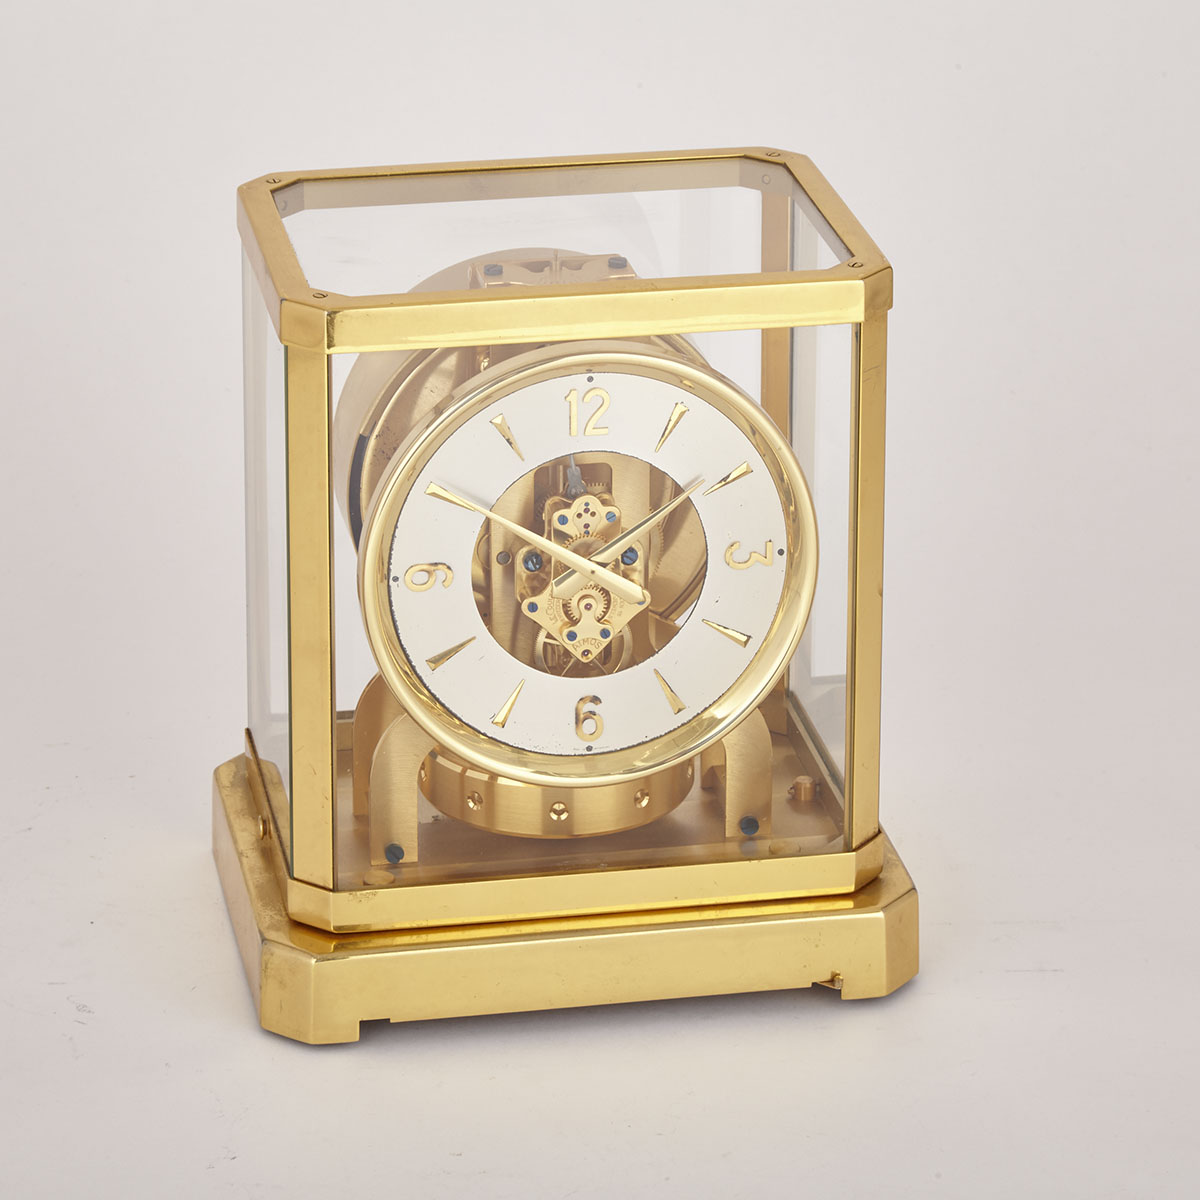 Early Le Coultre Atmos Clock, c.1948